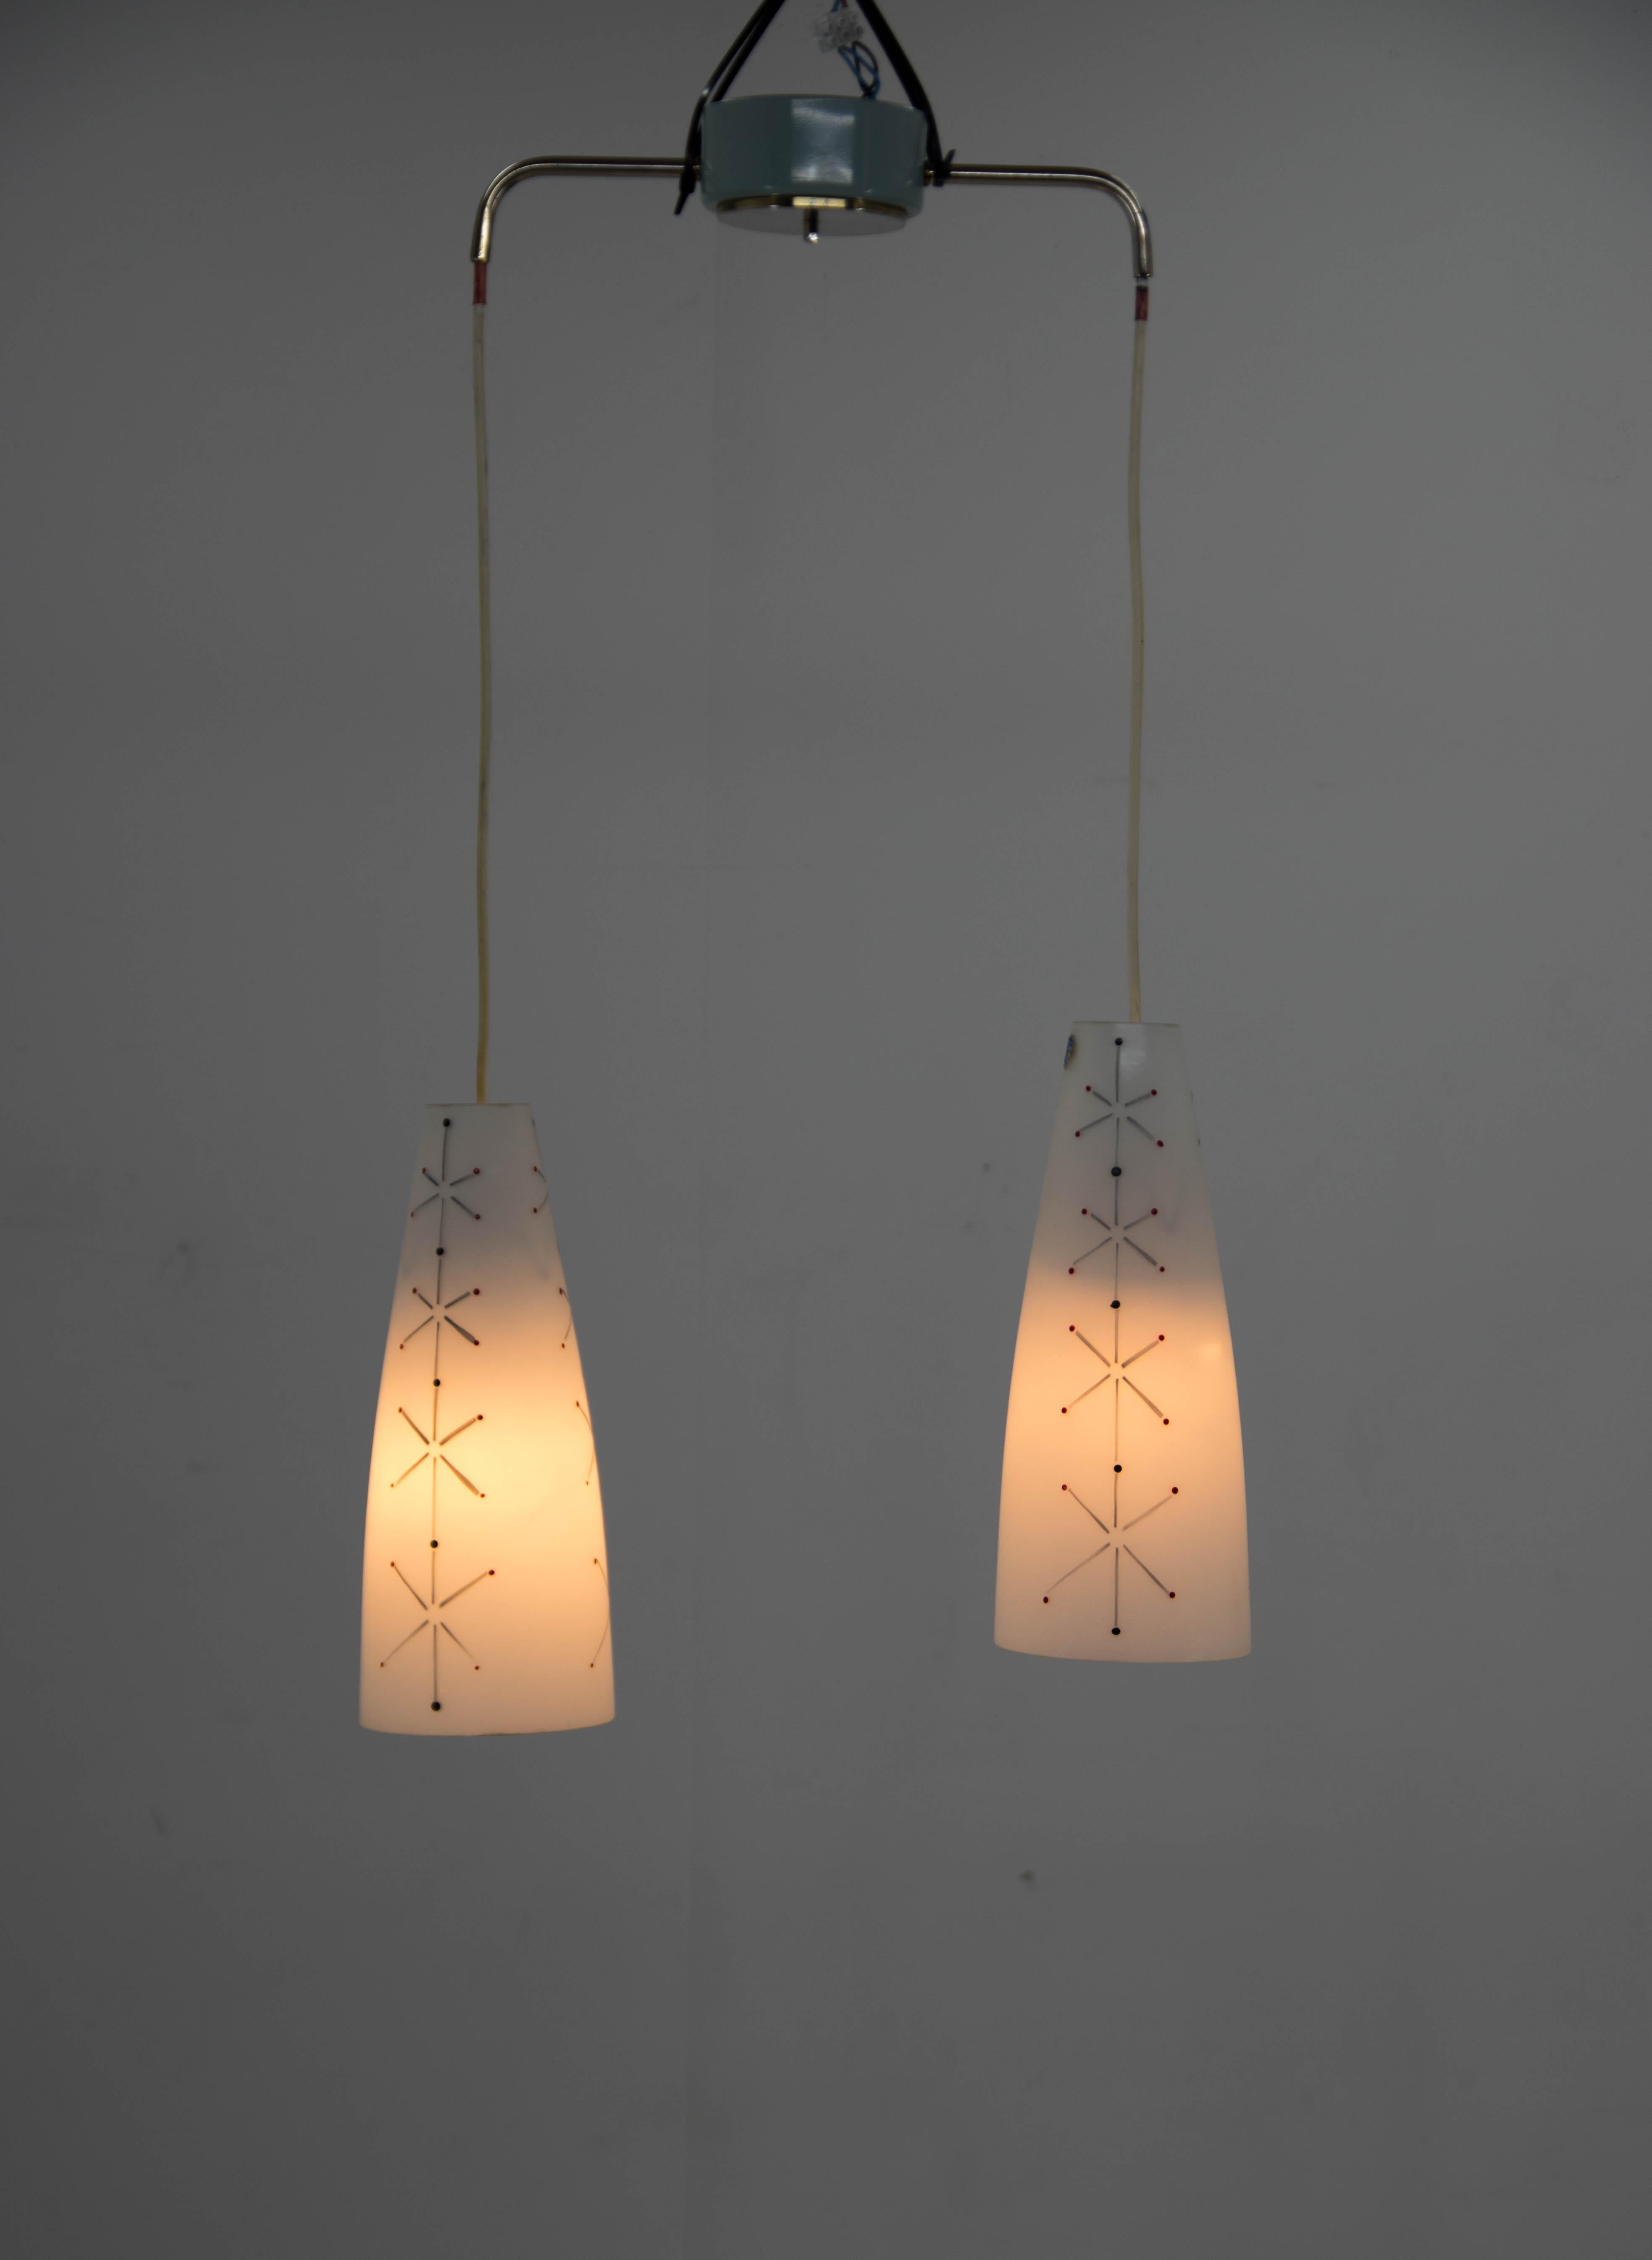 Midcentury pendant with two hand painted glass shades made in Czechoslovakia in1950s.
Very good original condition.
2x40W, E25-E27 bulbs
US wiring compatible.